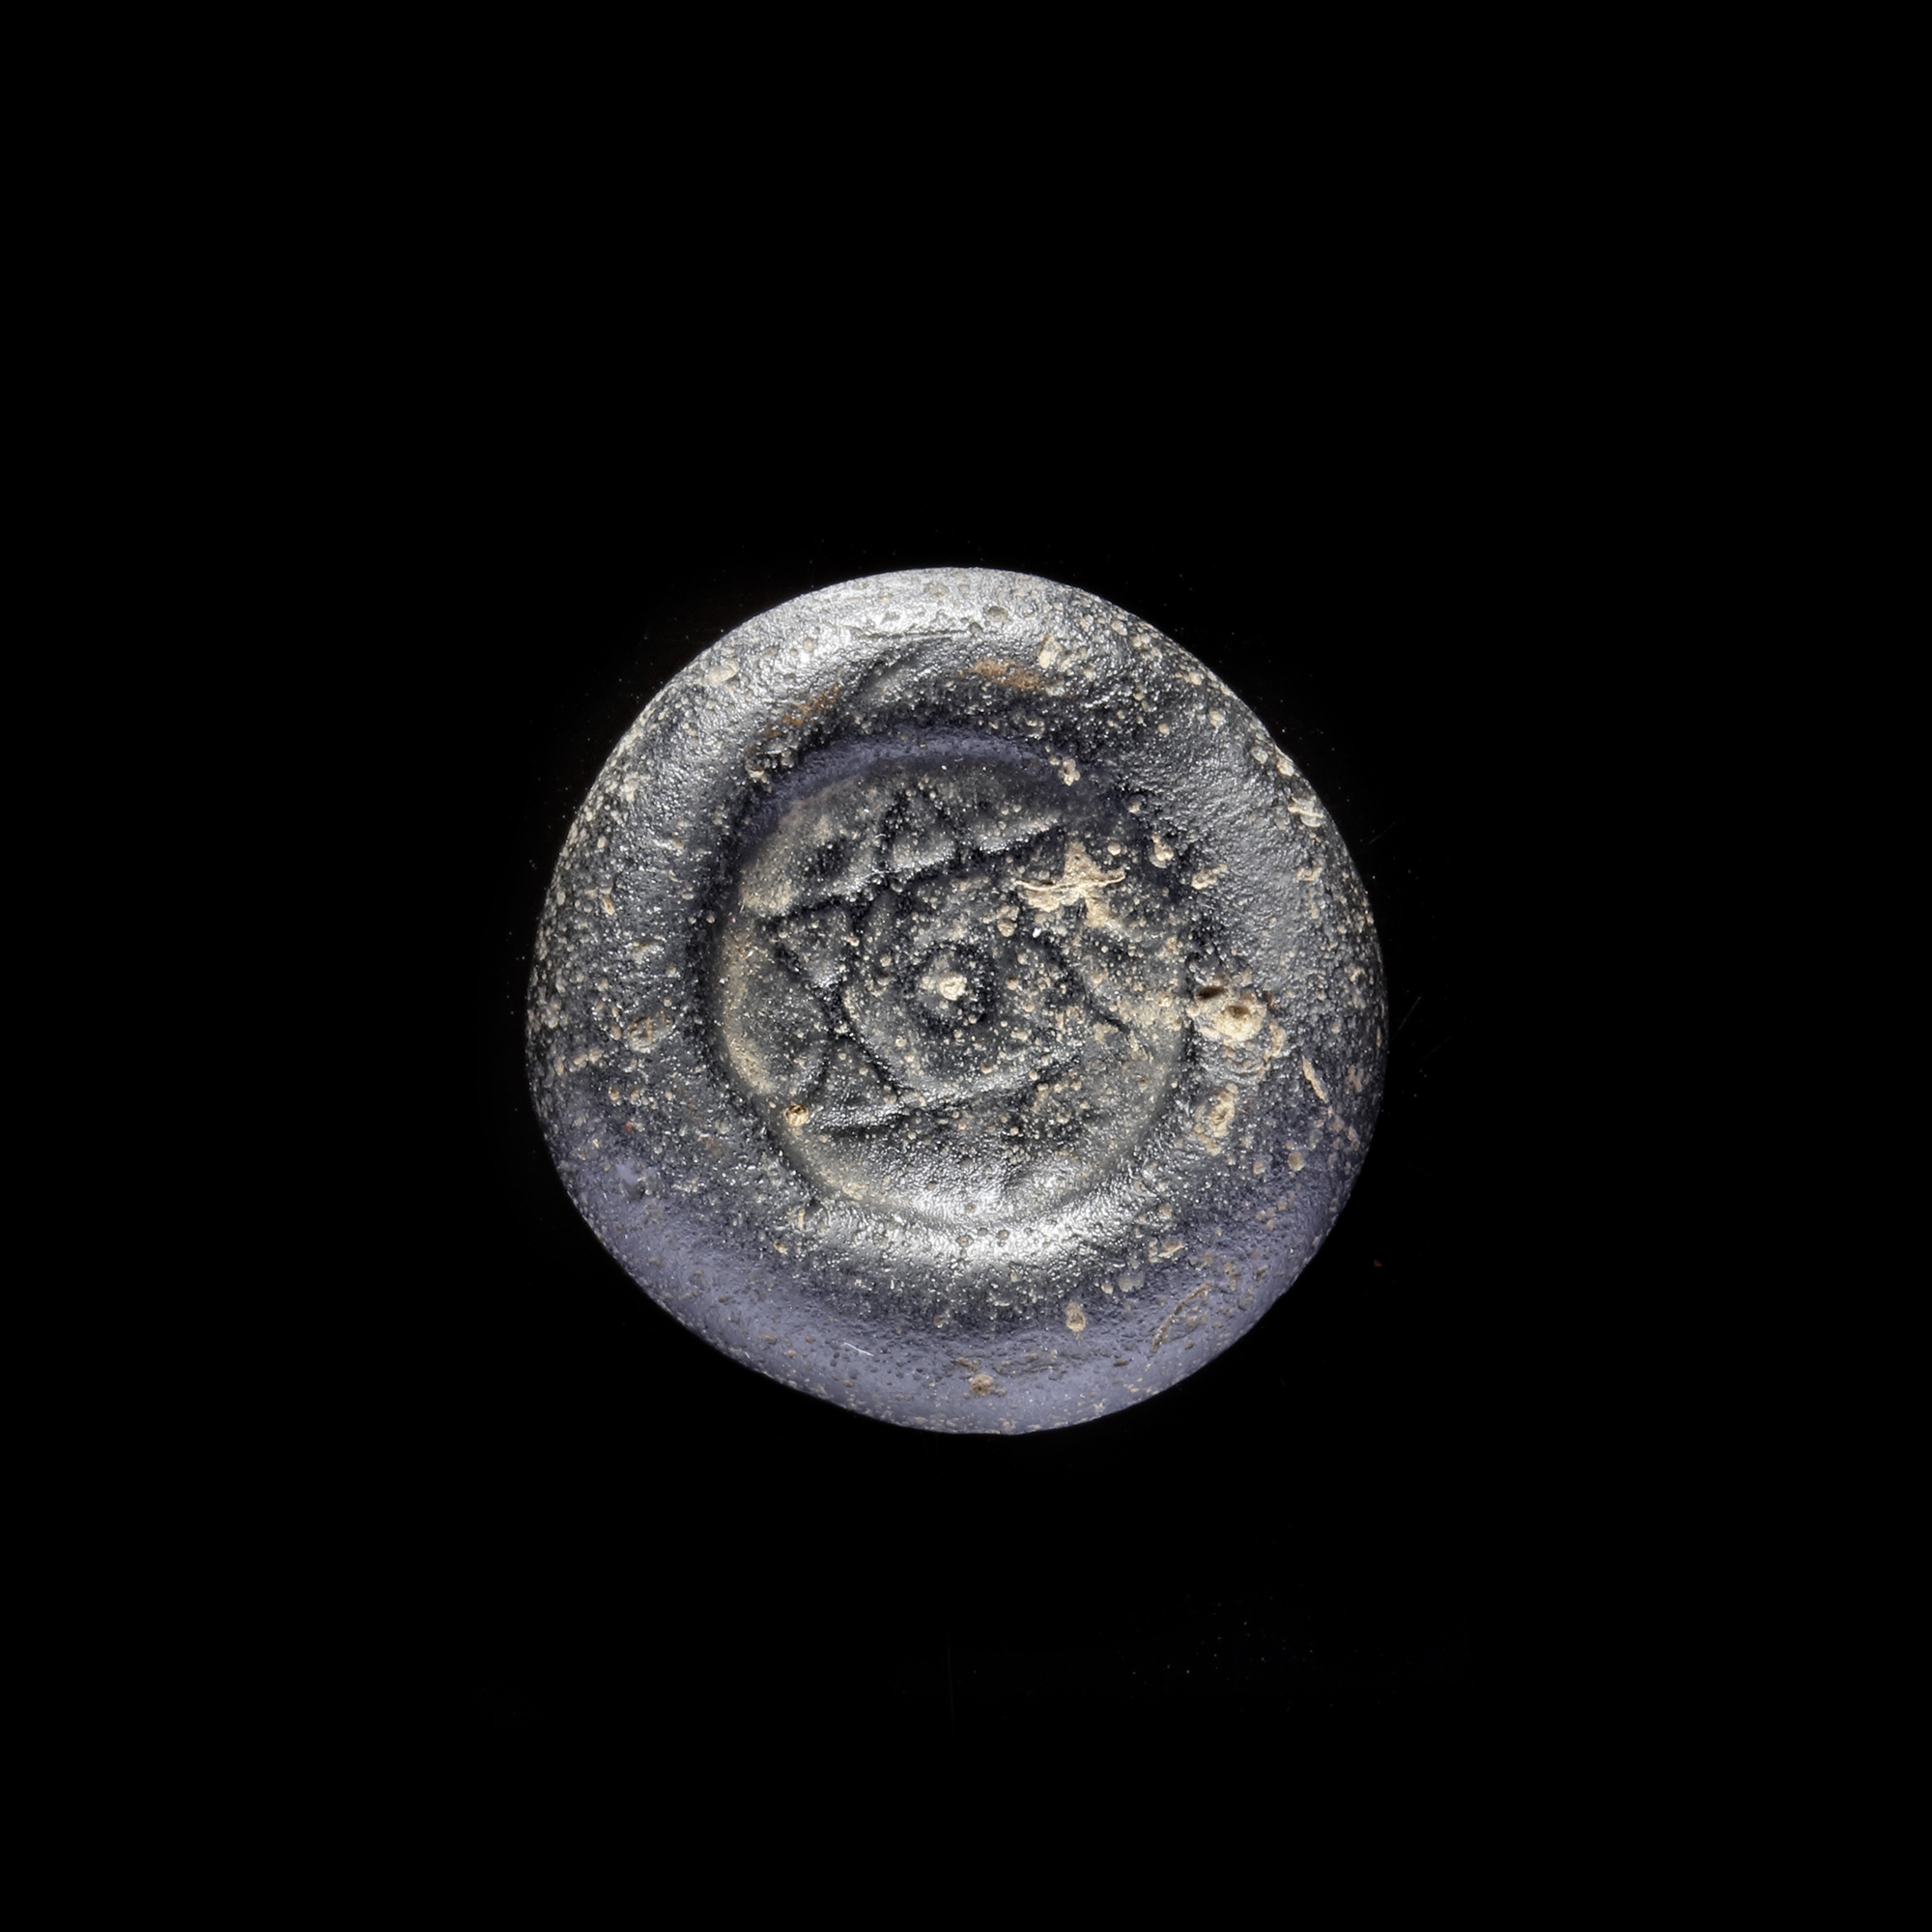 A FATIMID GLASS WEIGHT OF DOUBLE DIRHAM, EGYPT 10TH-11TH CENTURY